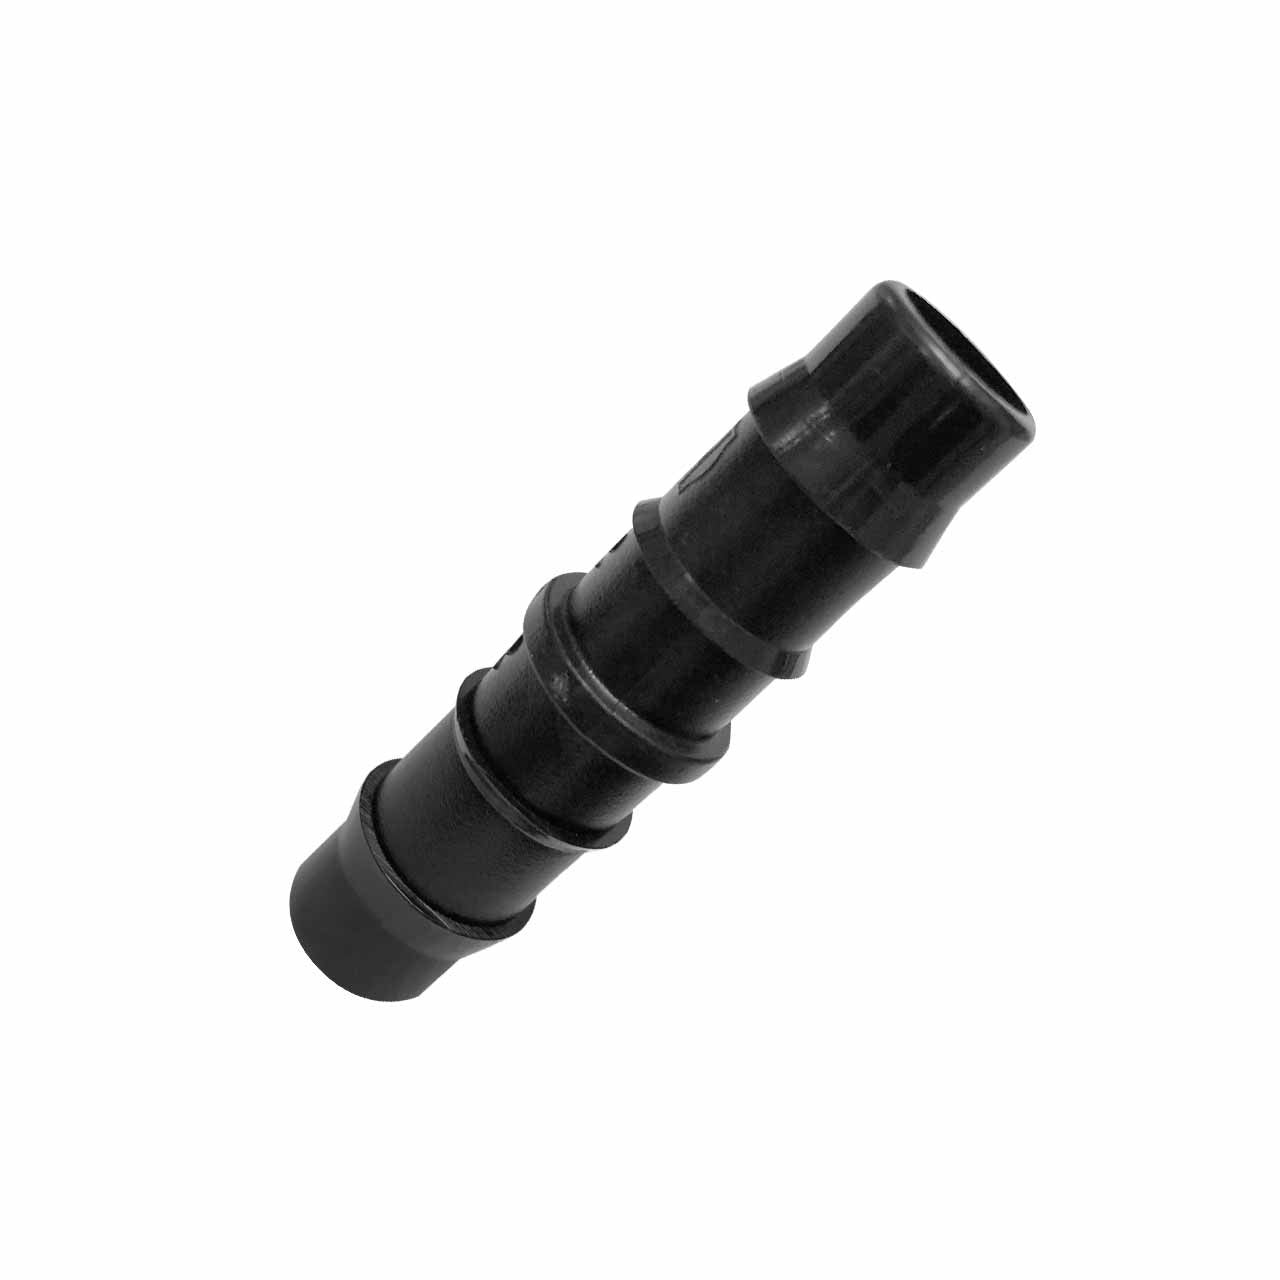 12mm (1/2") Straight Plastic Hose Fitting 12HJ - Great for ProVent 28603